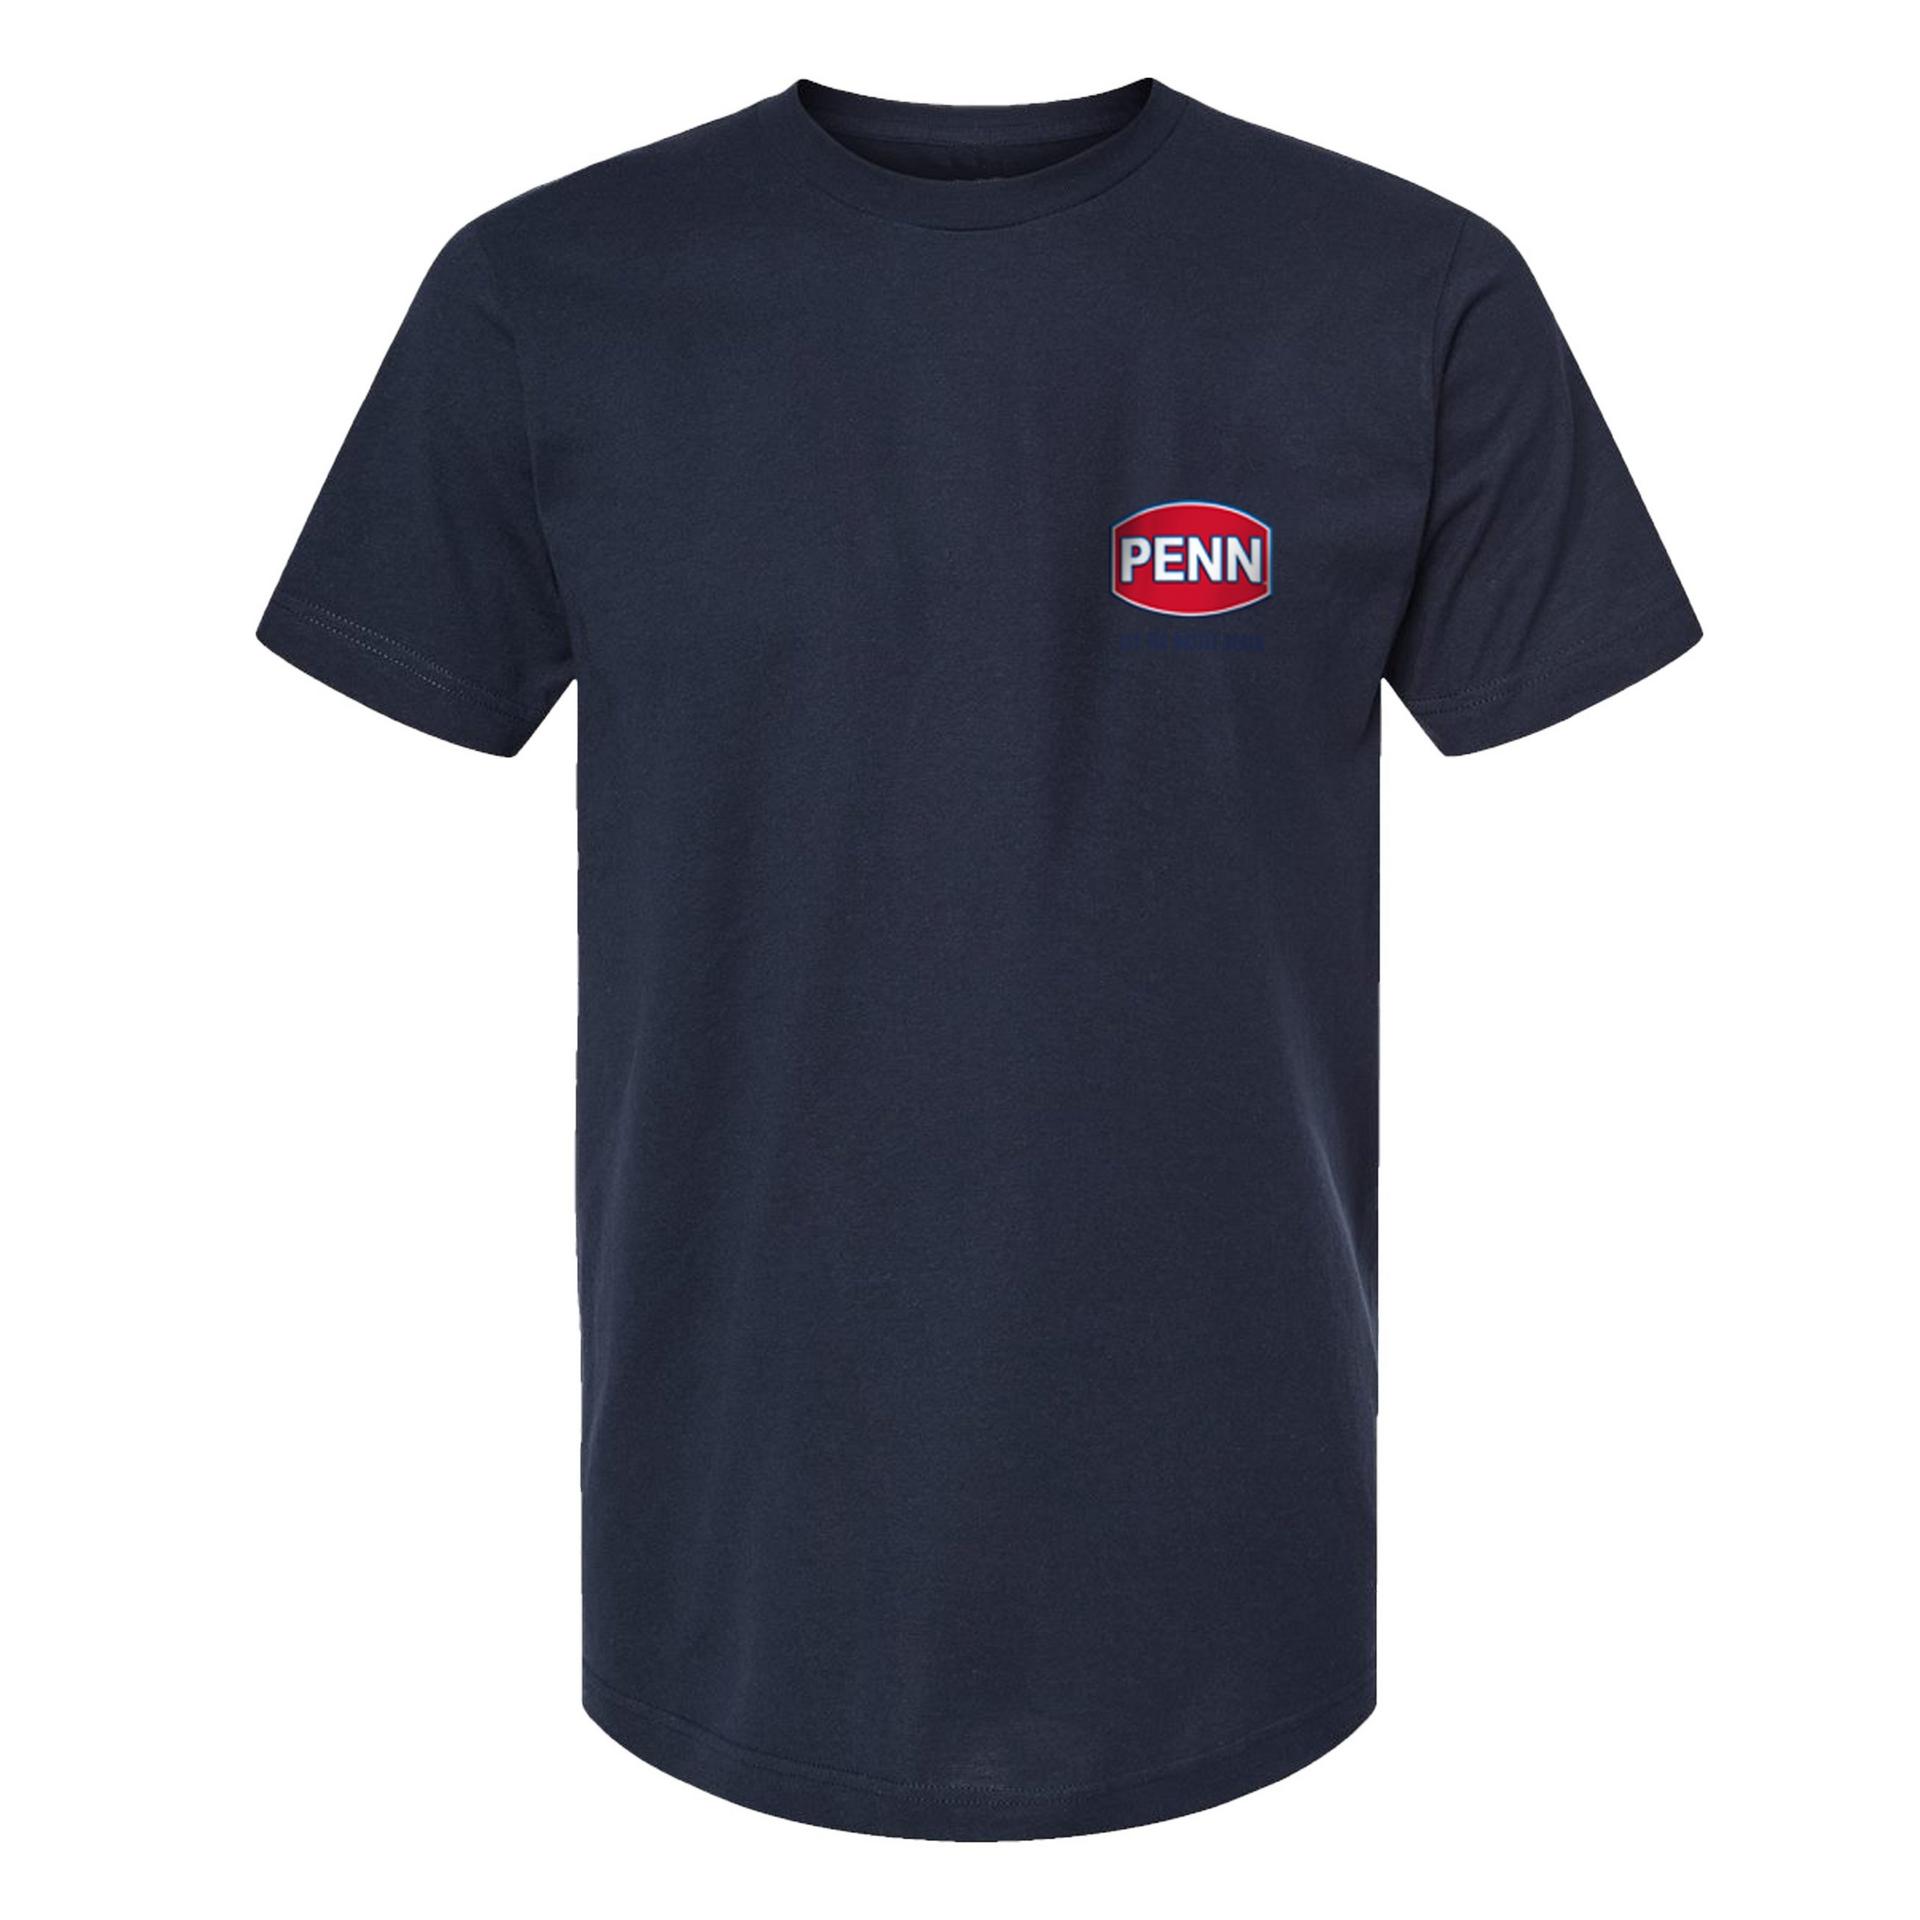 PENN's Exclusive Apparel for Serious Anglers - Penn Fishing